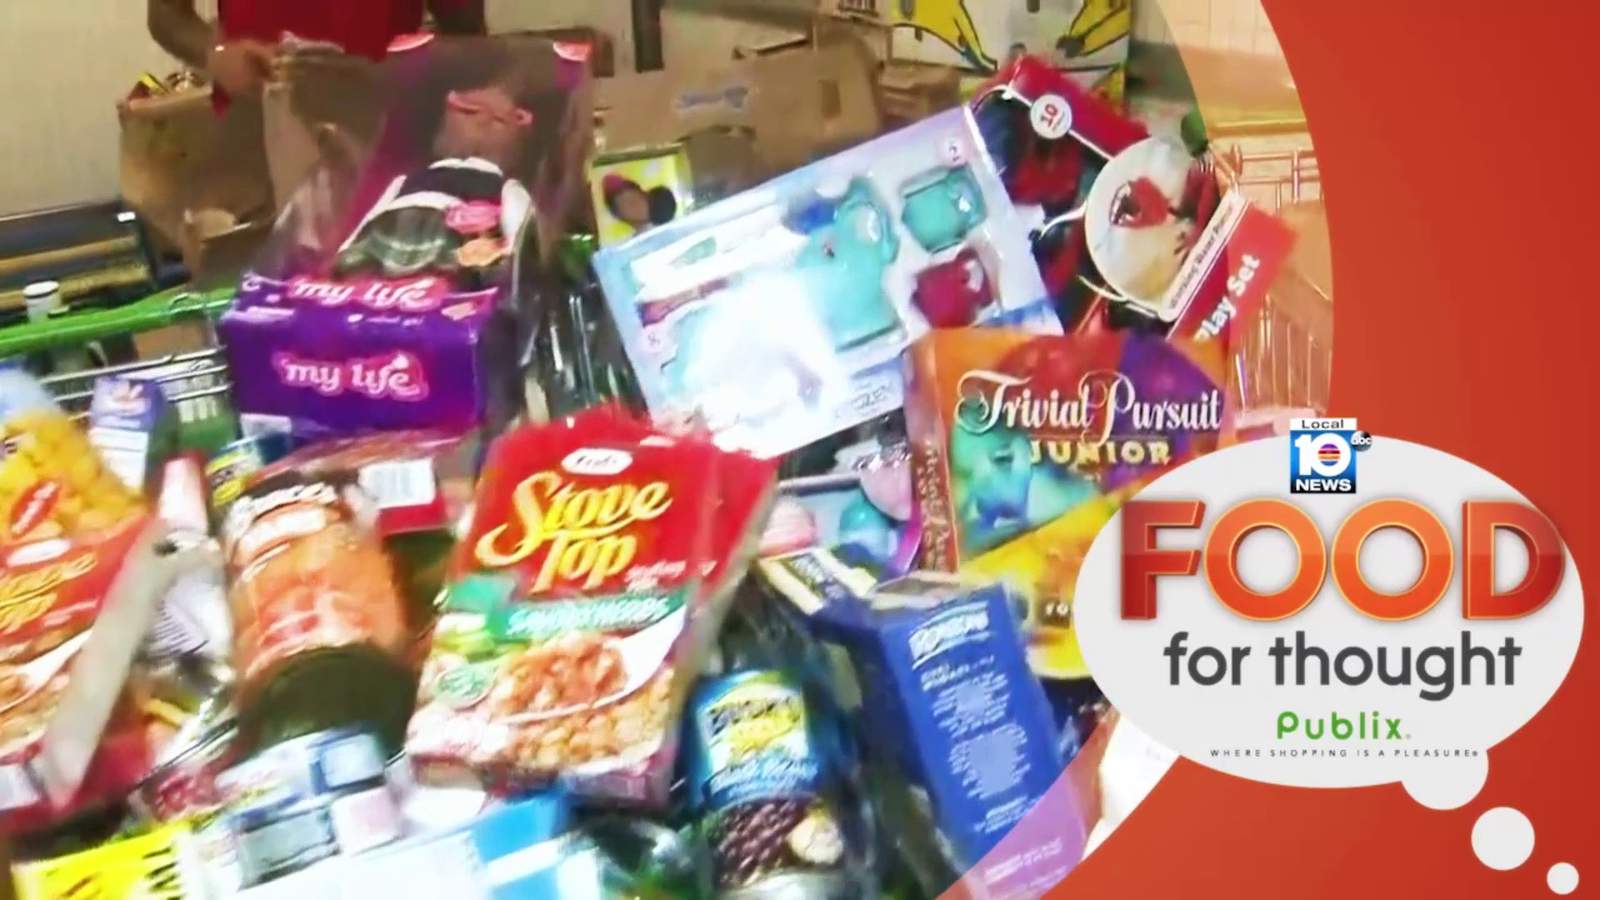 Local 10, Publix team up for Food For Thought